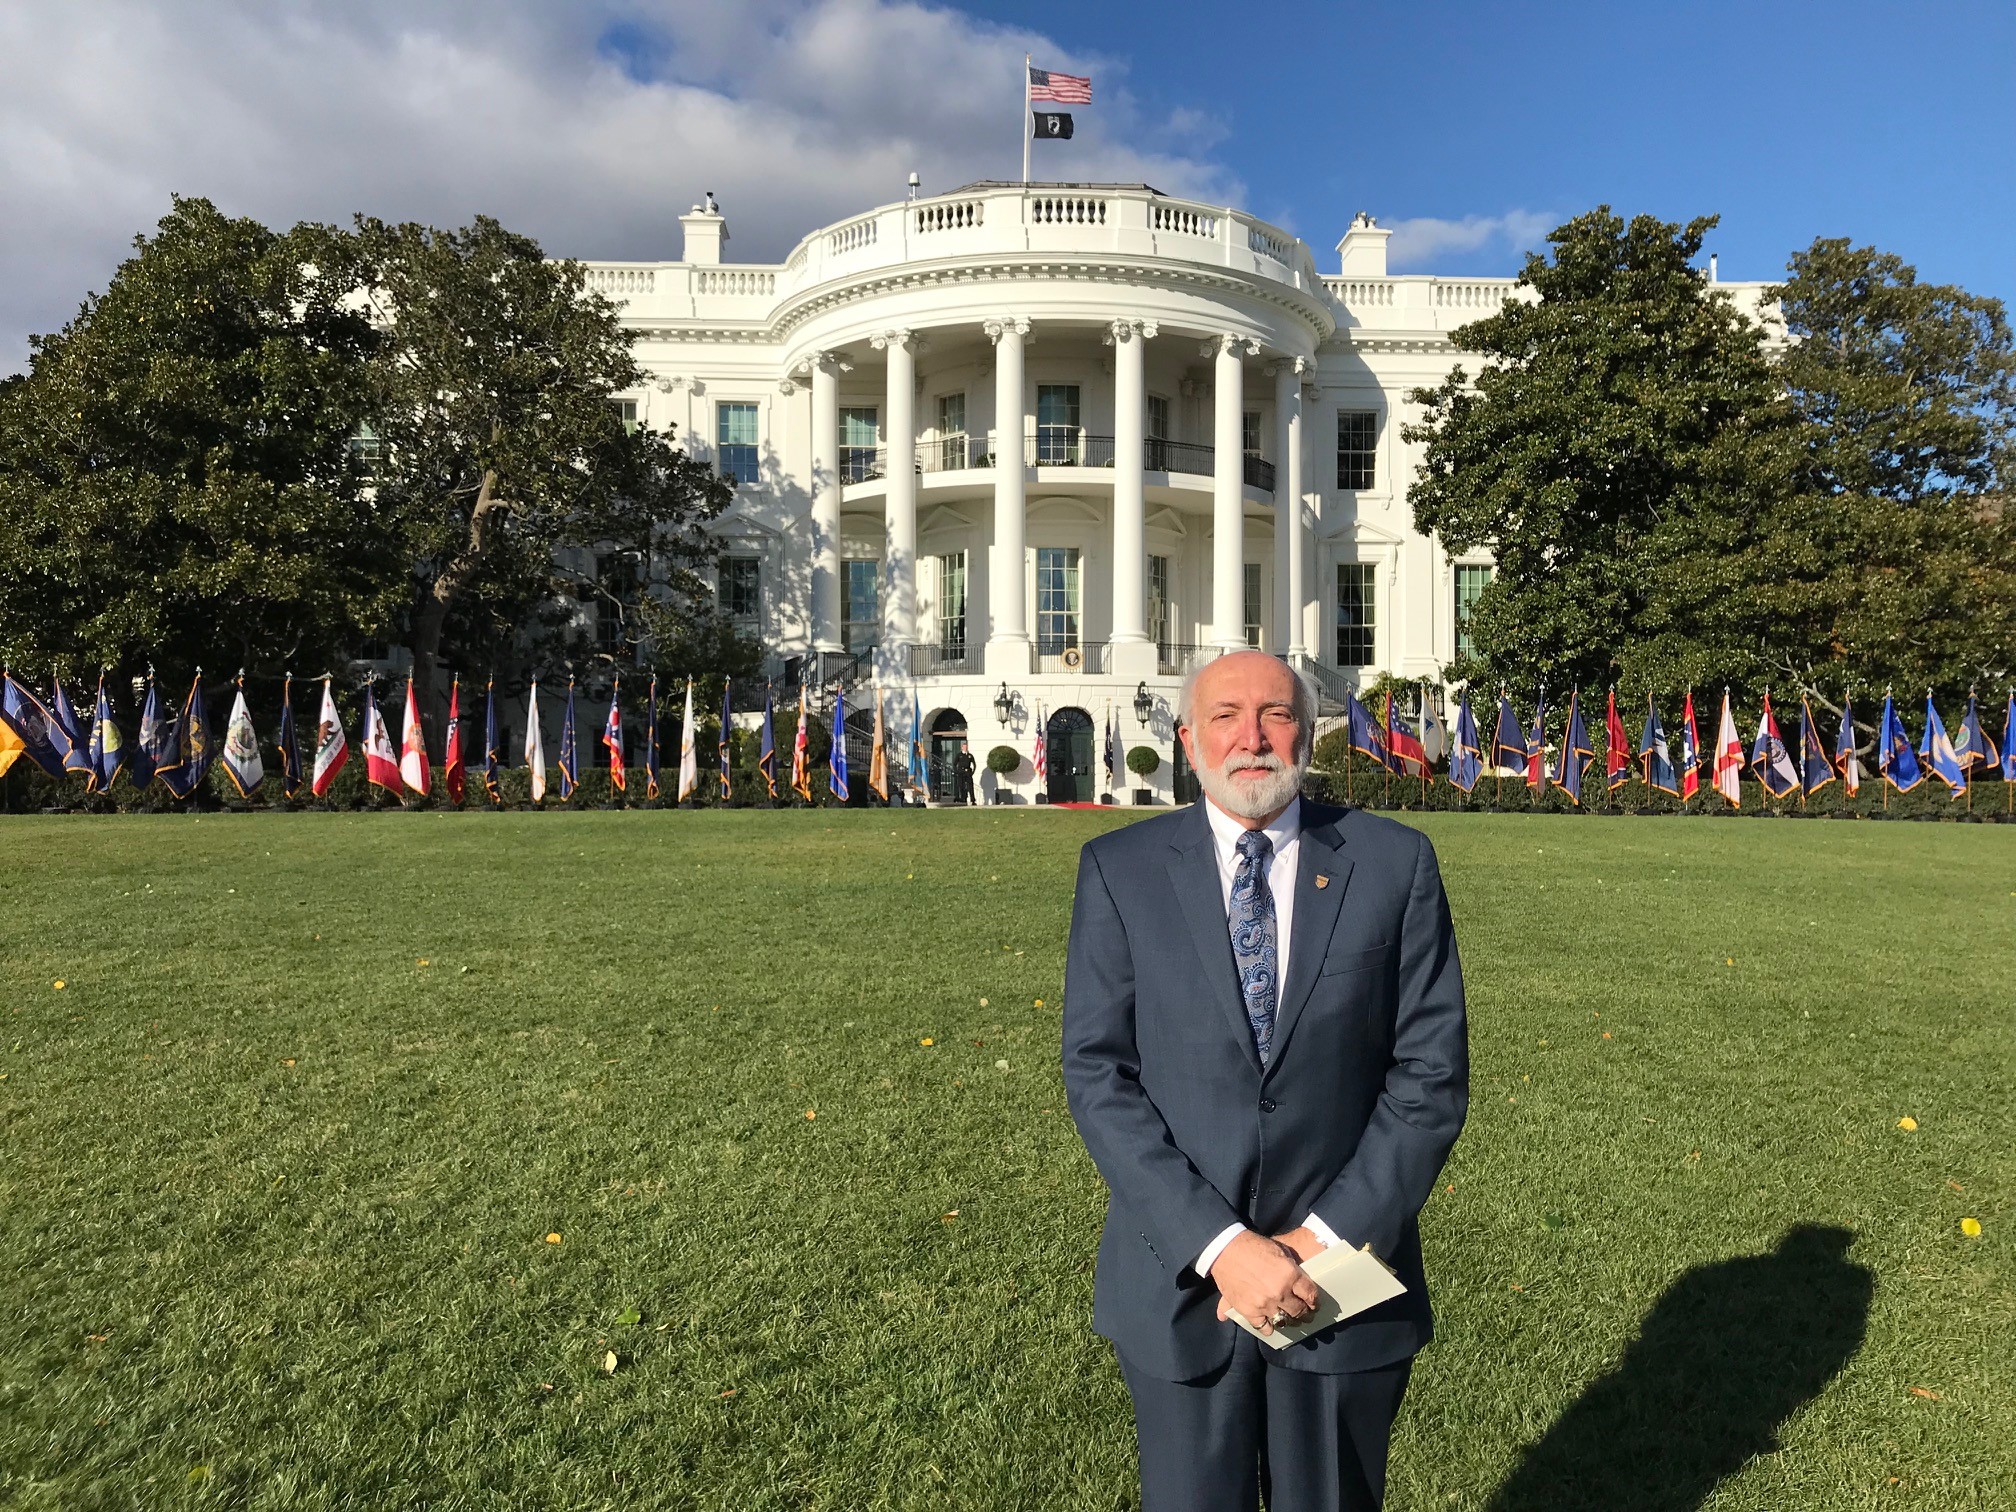 ASCE President Dennis Truax preparing to attend the signing ceremony of the infrastructure bill at the White House.